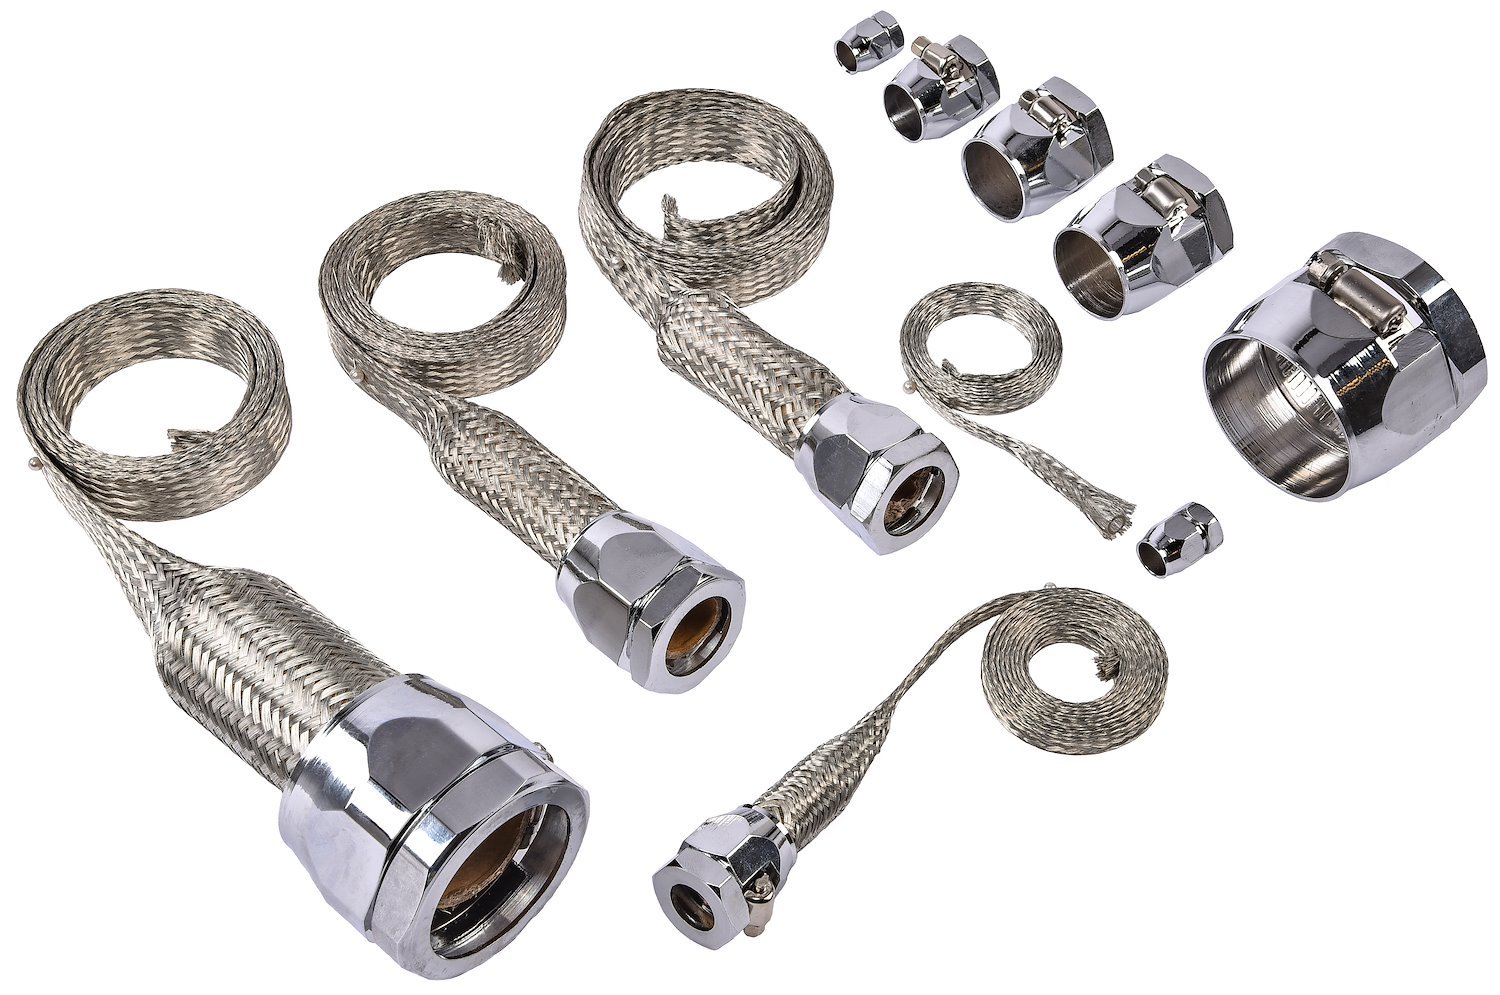 Braided Hose Sleeving Kit with Clamps [Chrome Hose Clamp Covers]